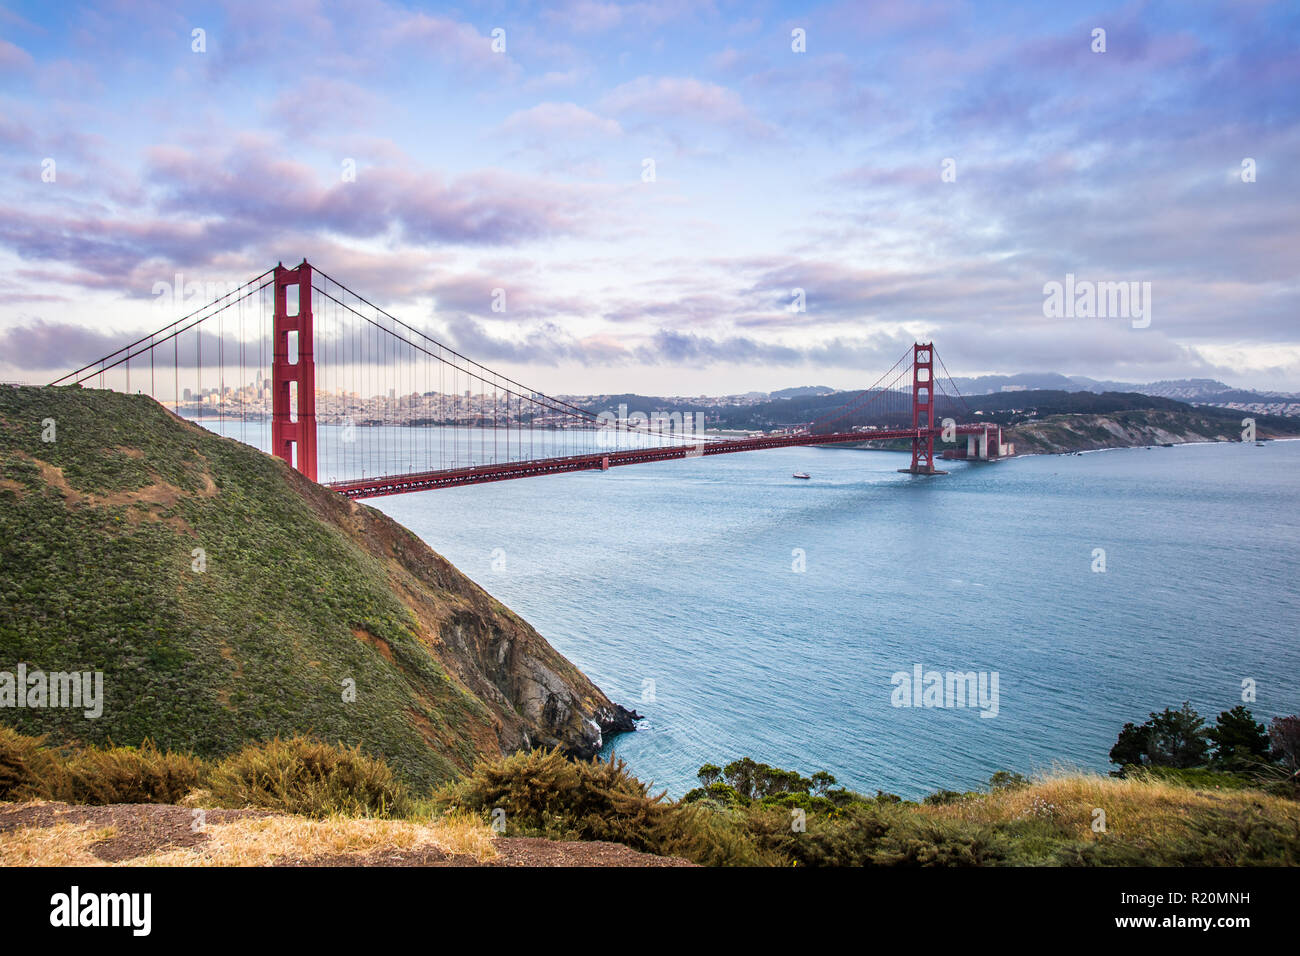 Panoramic view of Golden Gate Bridge connecting San Francisco and Marin Headlands, on a cloudy afternoon Stock Photo